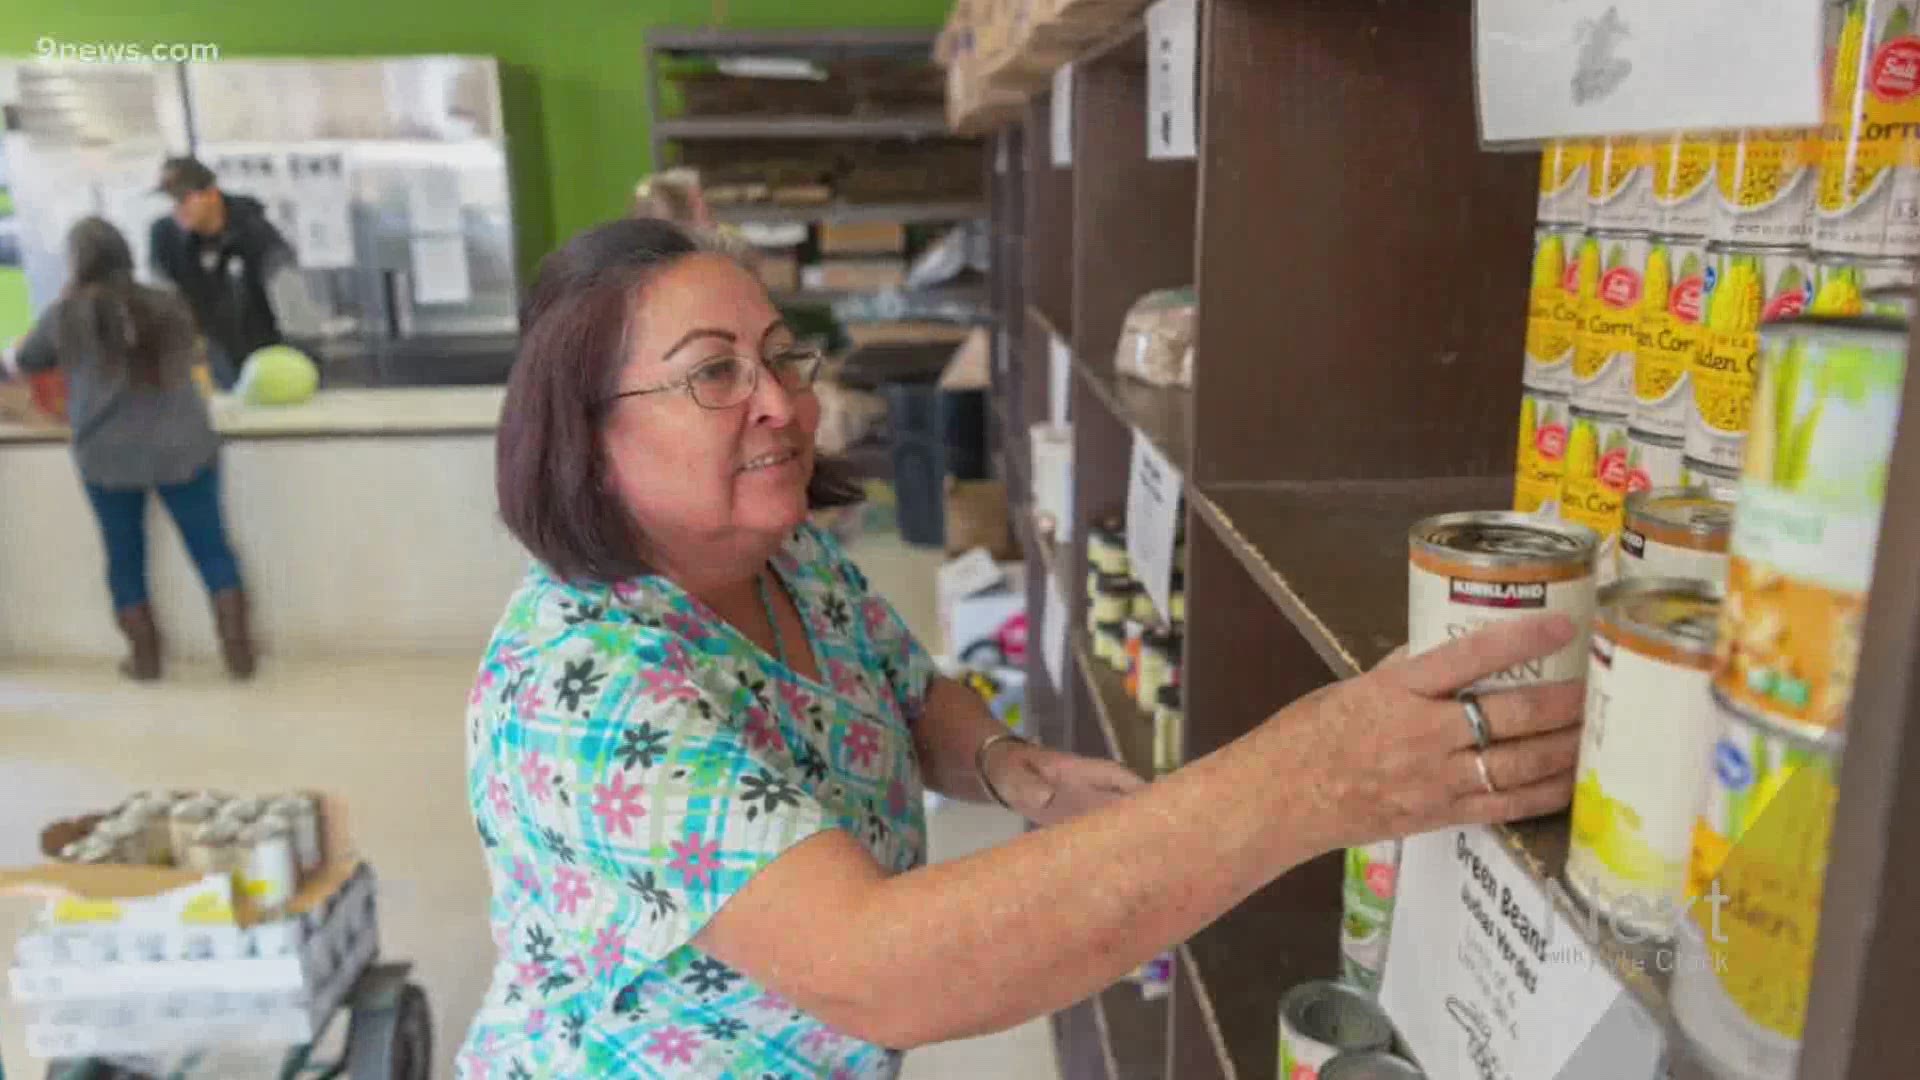 Our weekly giving campaign, Word of Thanks, focuses on the San Luis Valley today; 1/4 people there need local food pantries to feed their families. We can help.